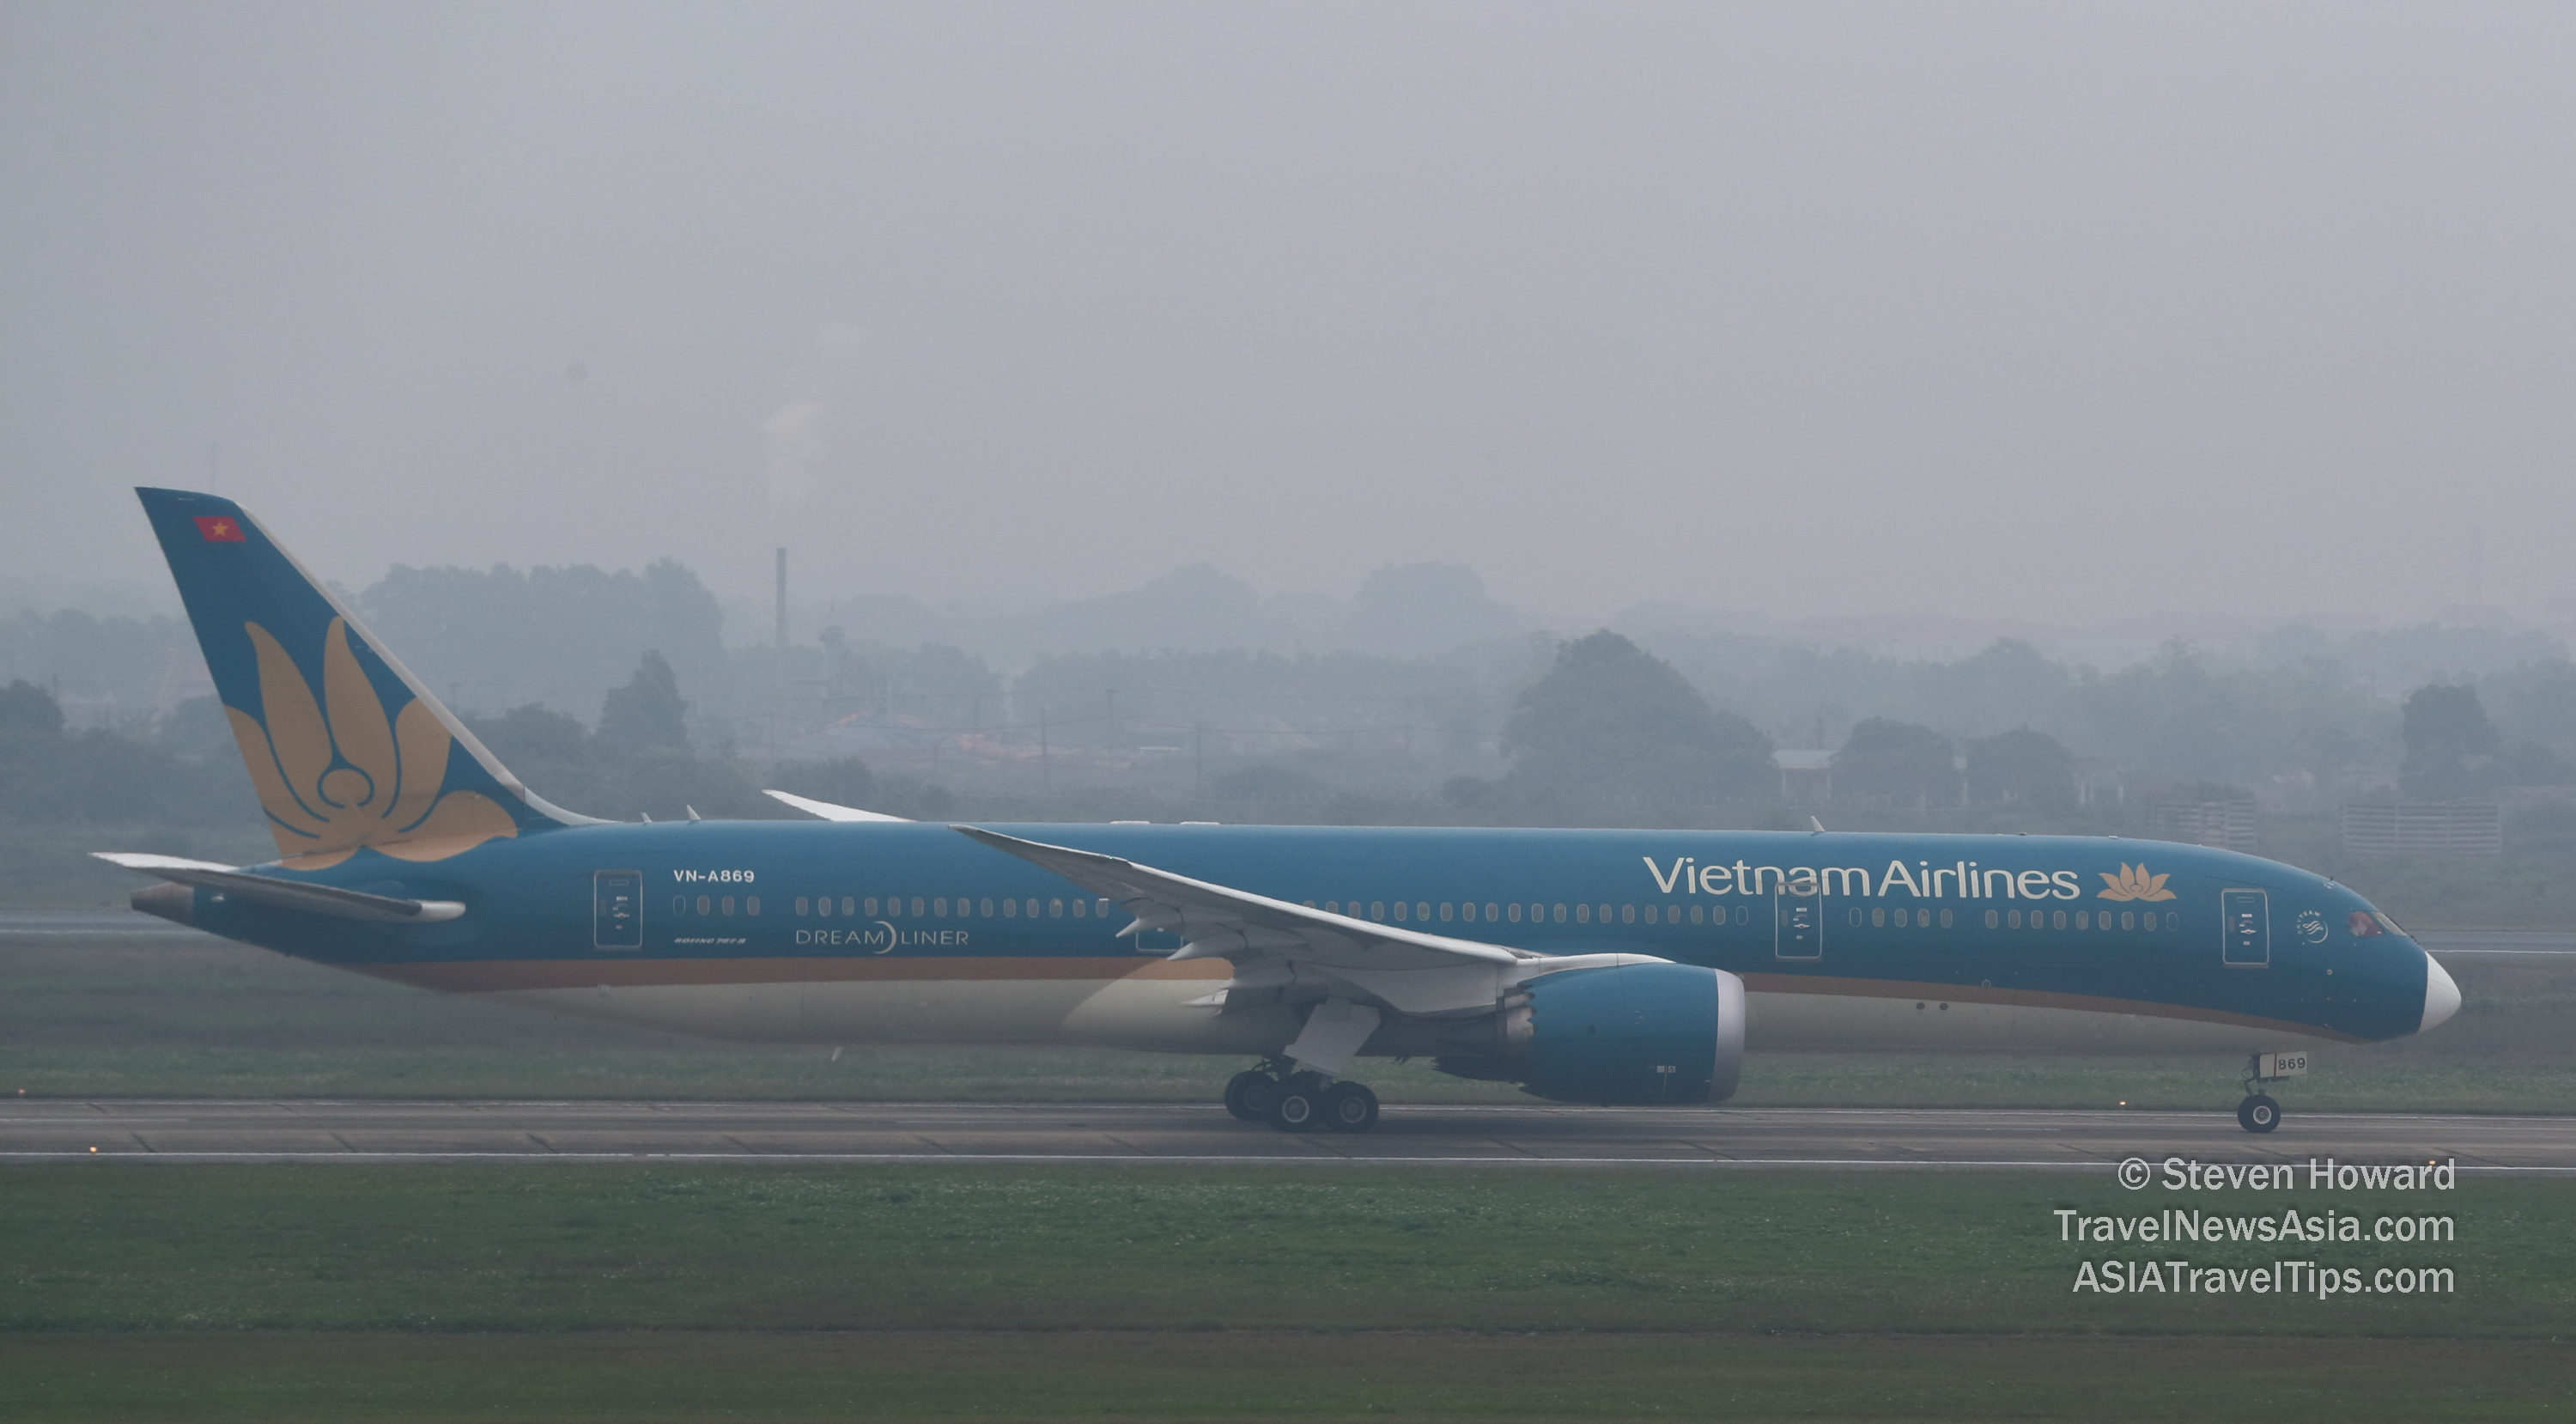 Vietnam Airlines Boeing 787-9 MSN 38768 reg: VN-A869. Picture by Steven Howard of TravelNewsAsia.com Click to enlarge.